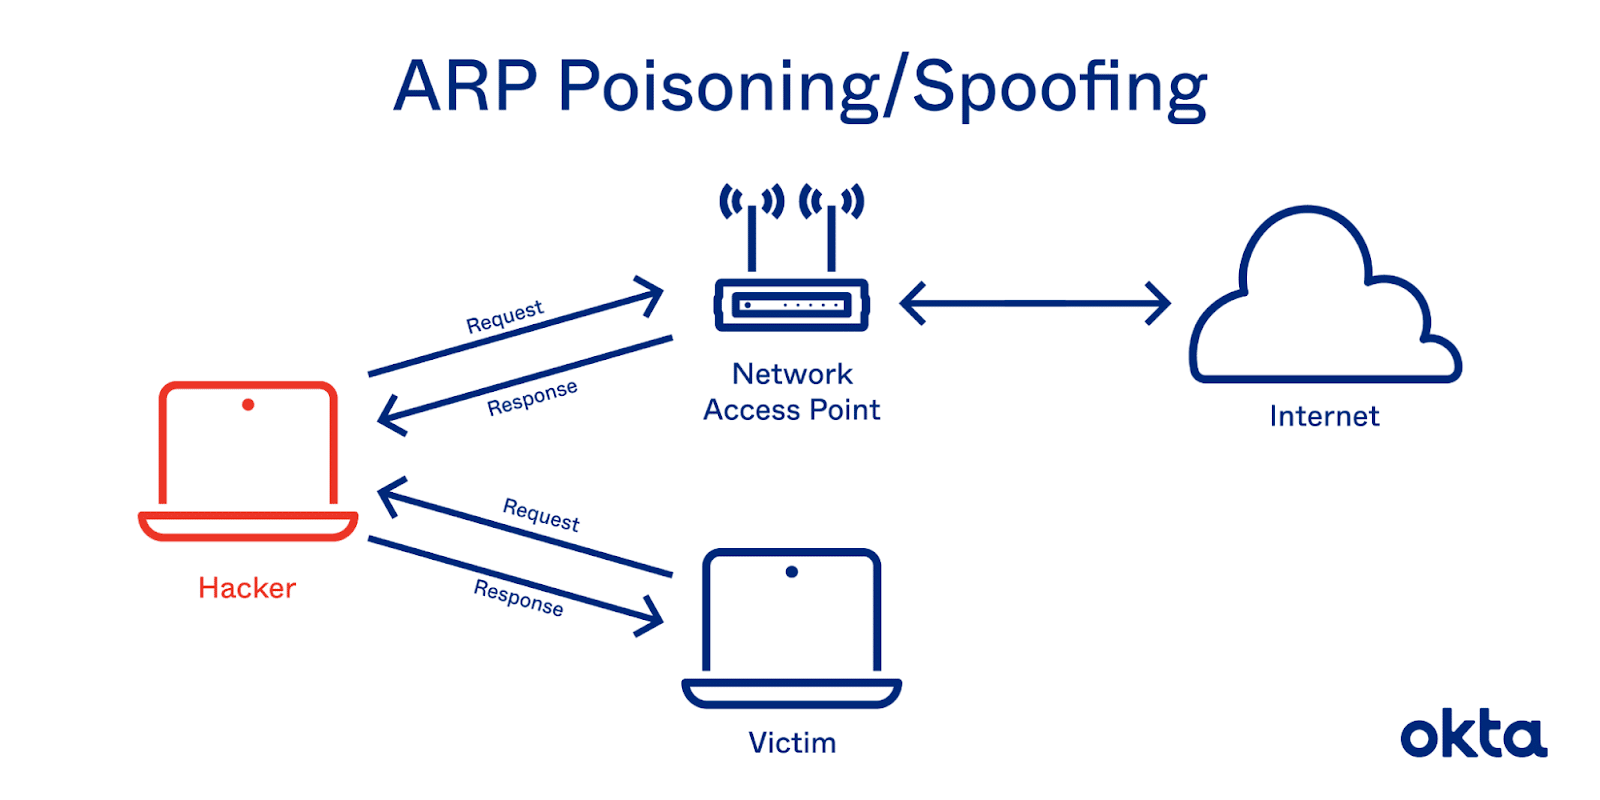 IMmge showing how a hacker performs ARP spoofing to intercept network traffic